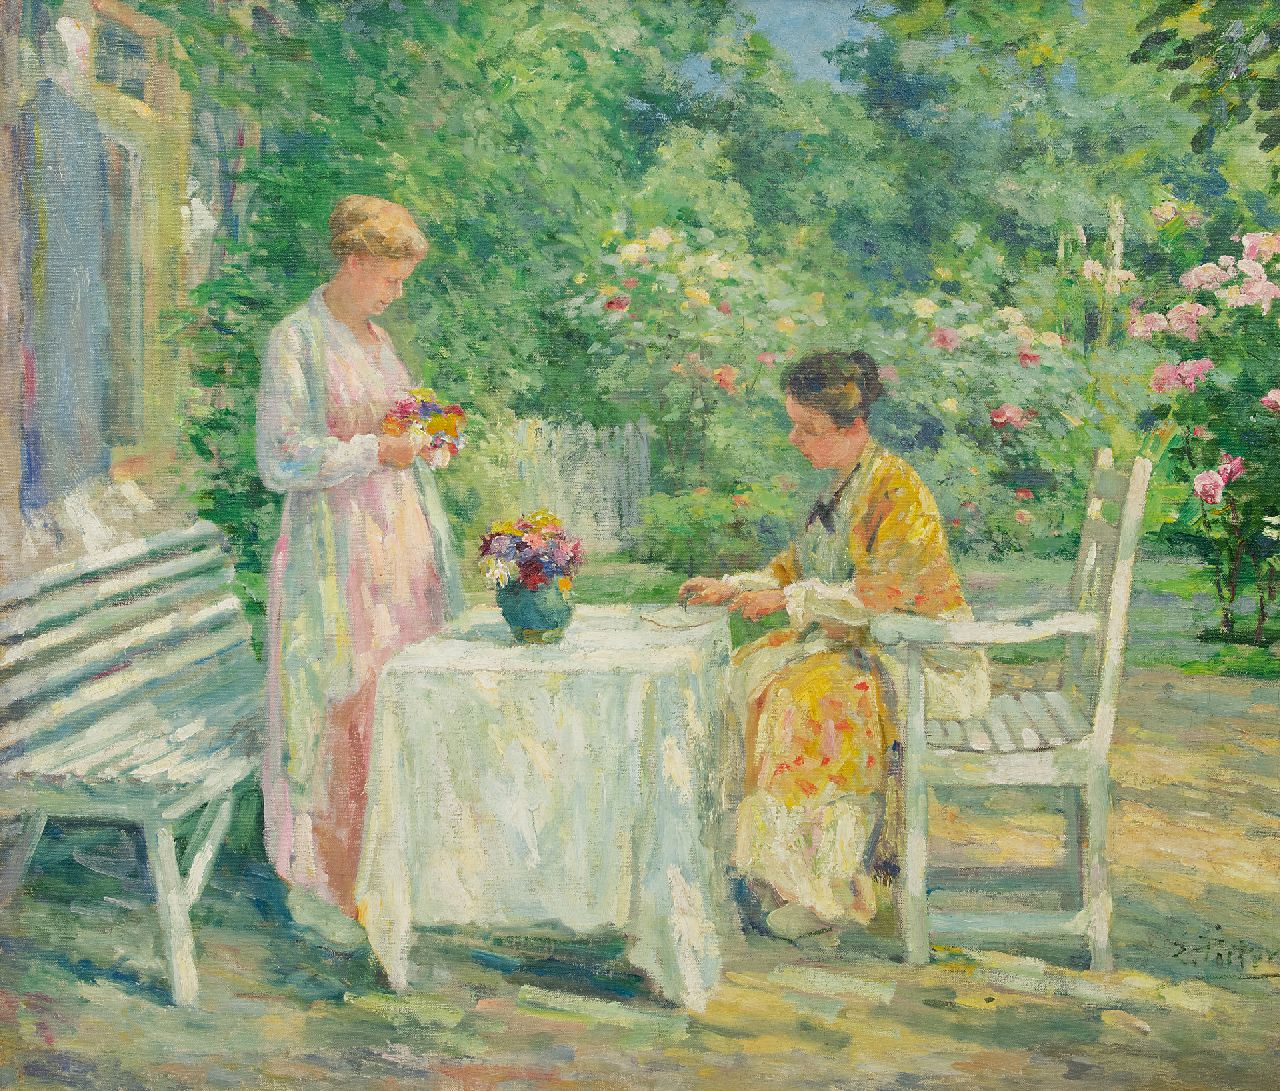 Pieters E.  | Evert Pieters | Paintings offered for sale | In the garden, oil on canvas 79.4 x 92.8 cm, signed l.r.